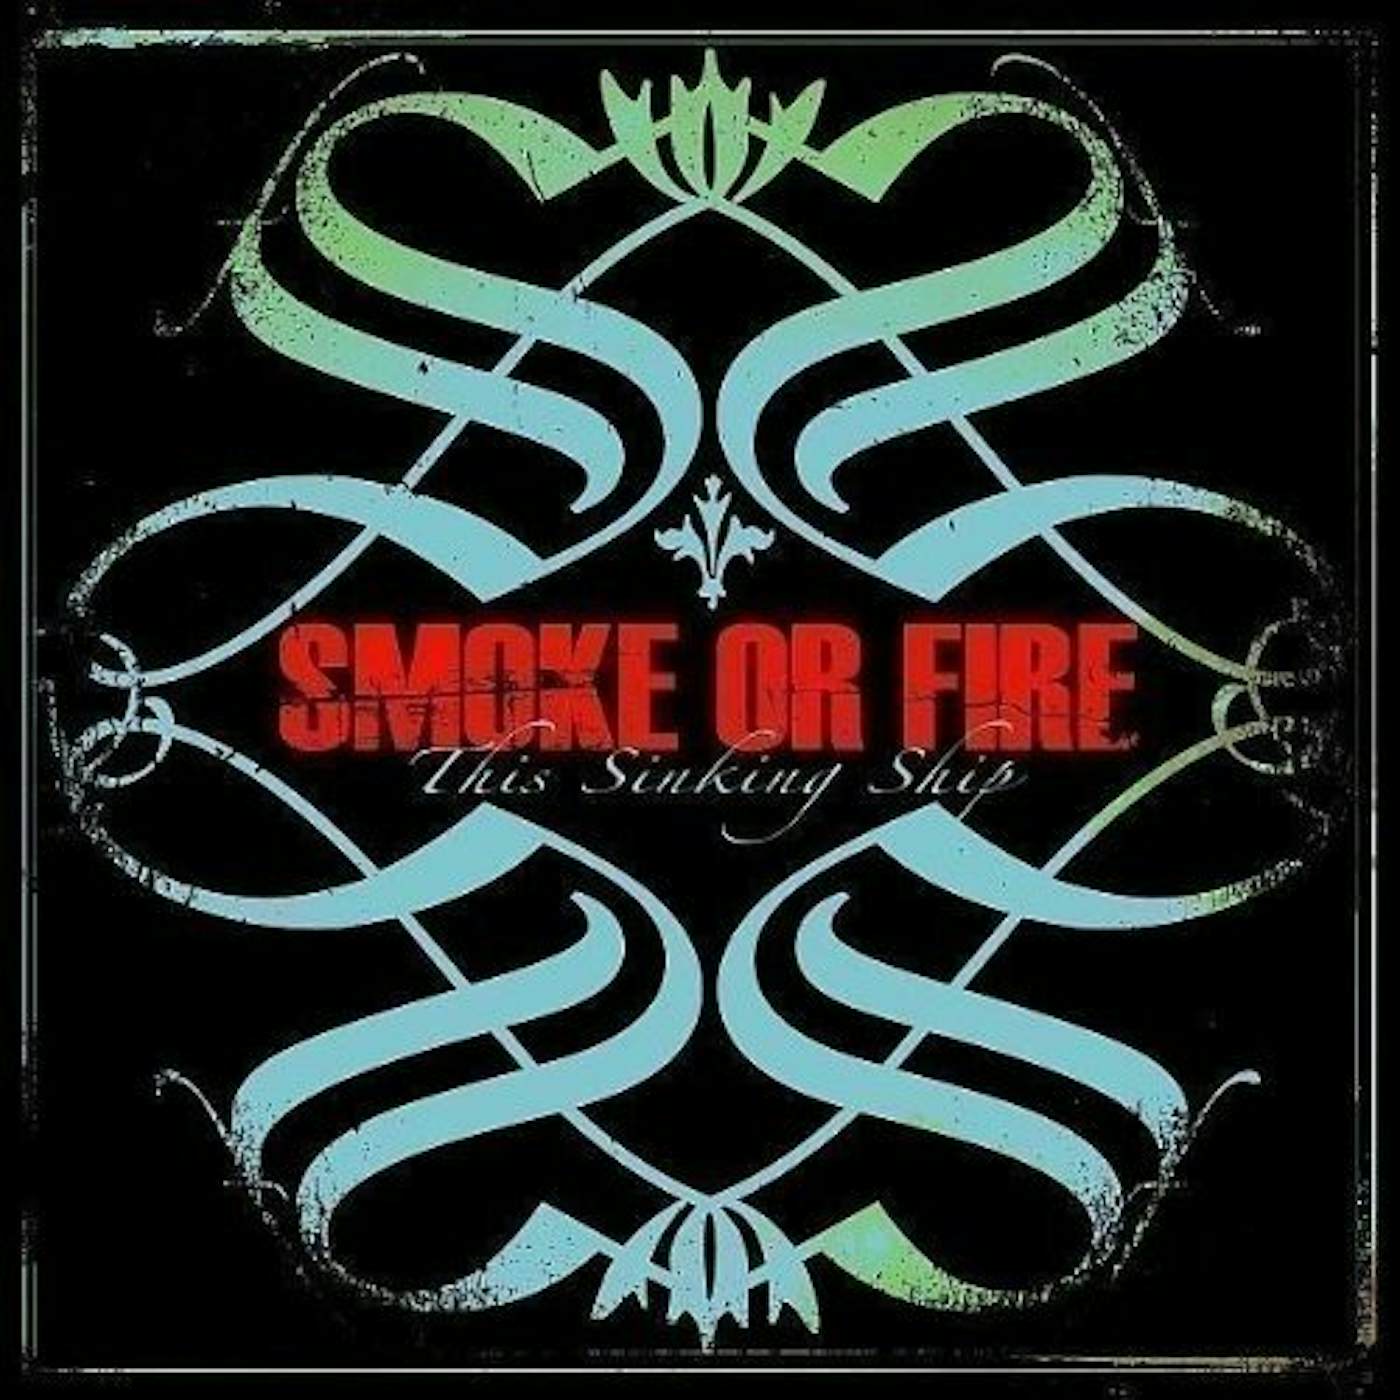 Smoke Or Fire This Sinking Ship Vinyl Record